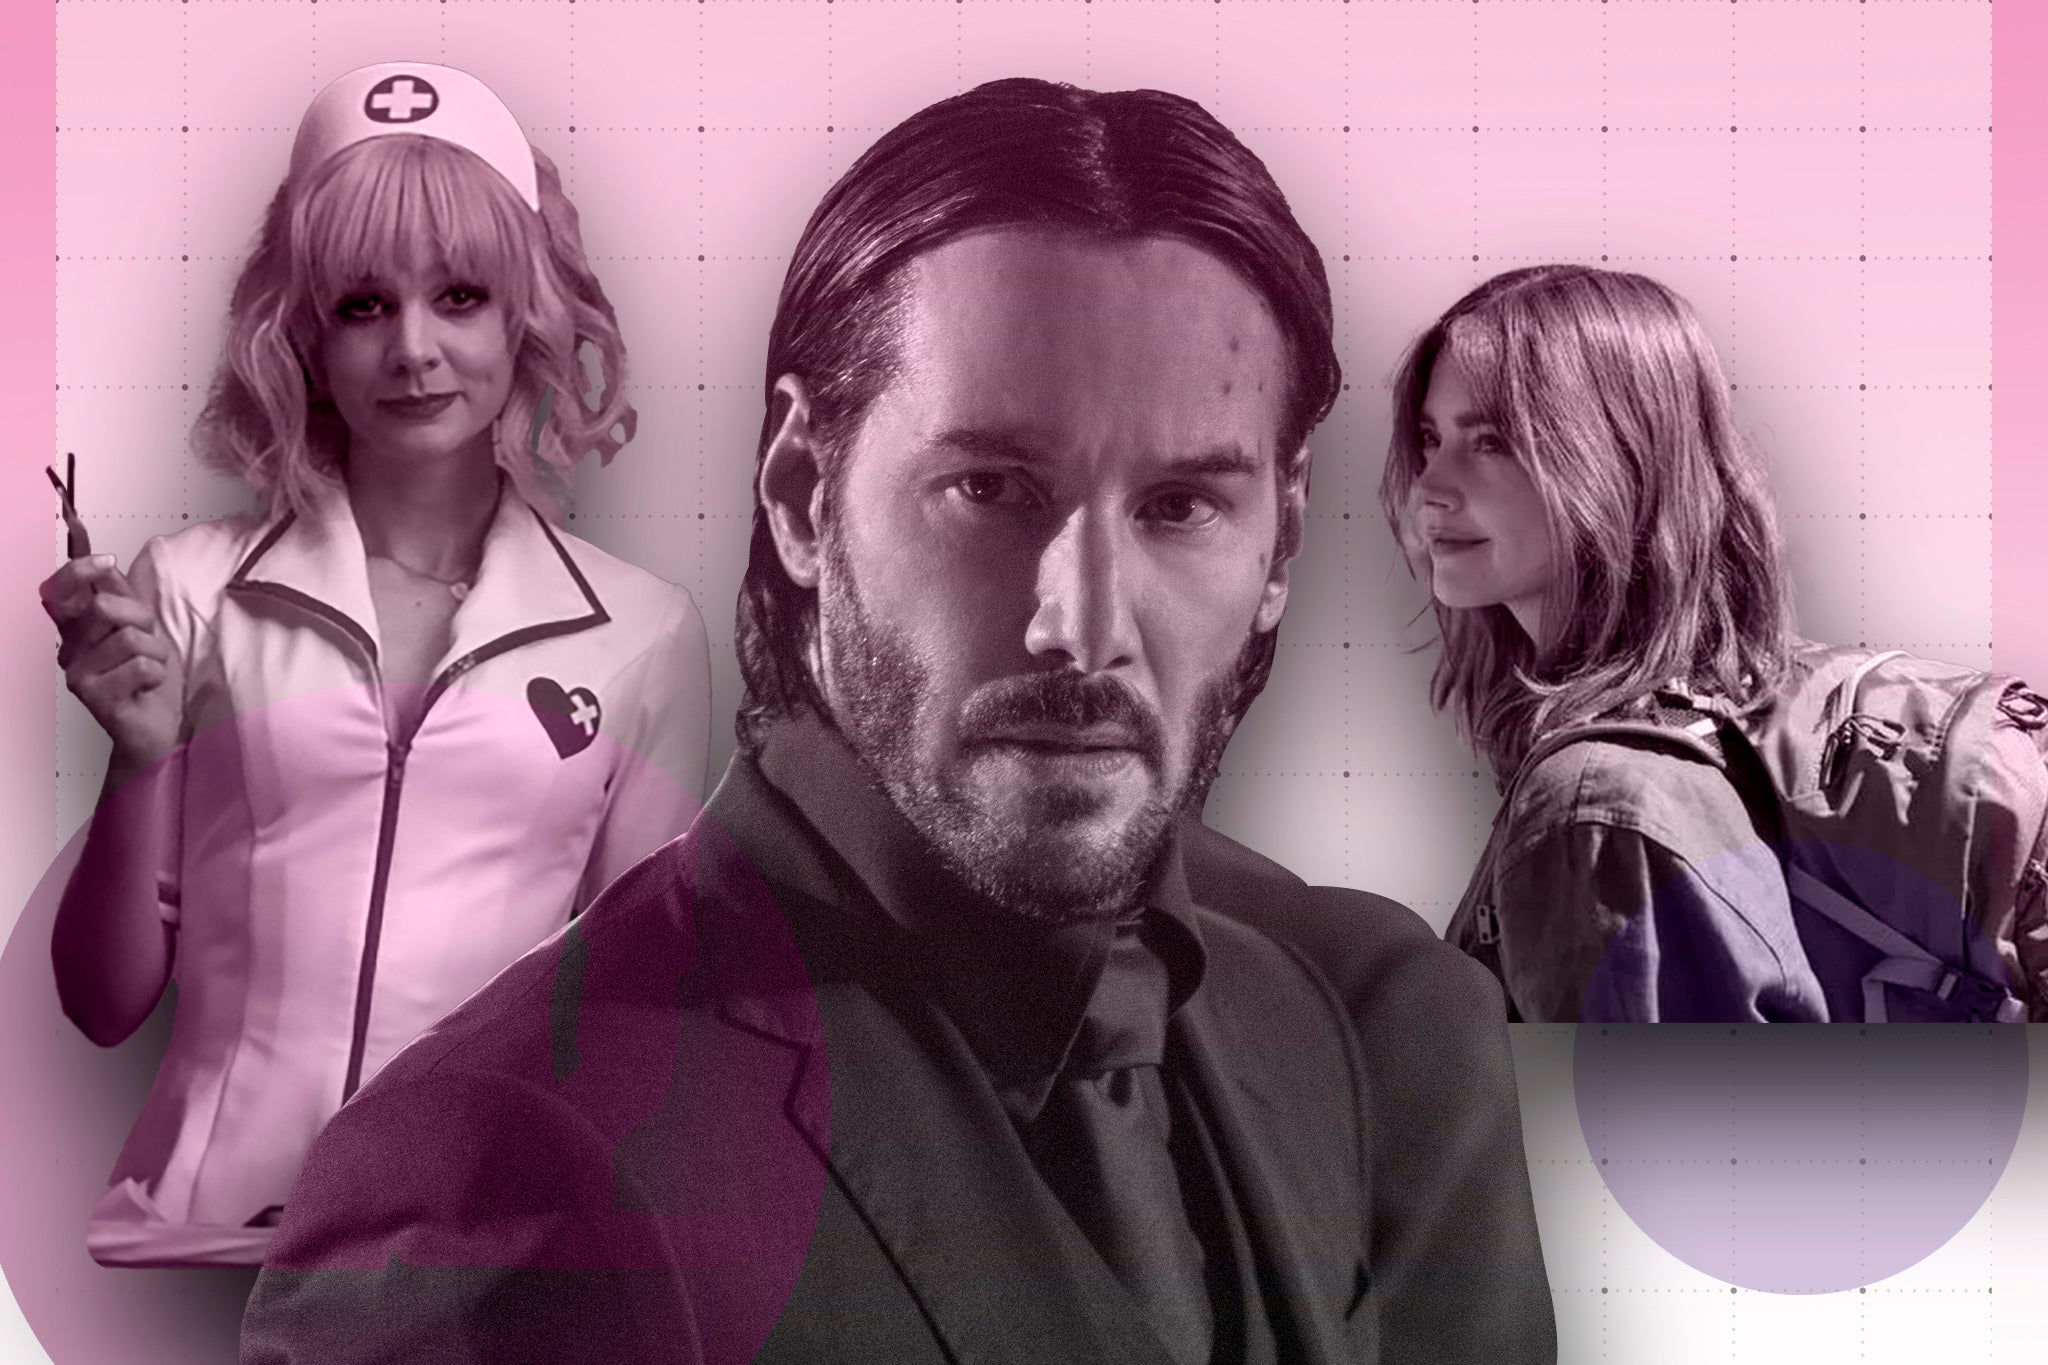 Revenge tales: Carey Mulligan in ‘Promising Young Woman’, Keanu Reeves as John Wick, and Jenna Coleman in ‘Wilderness’